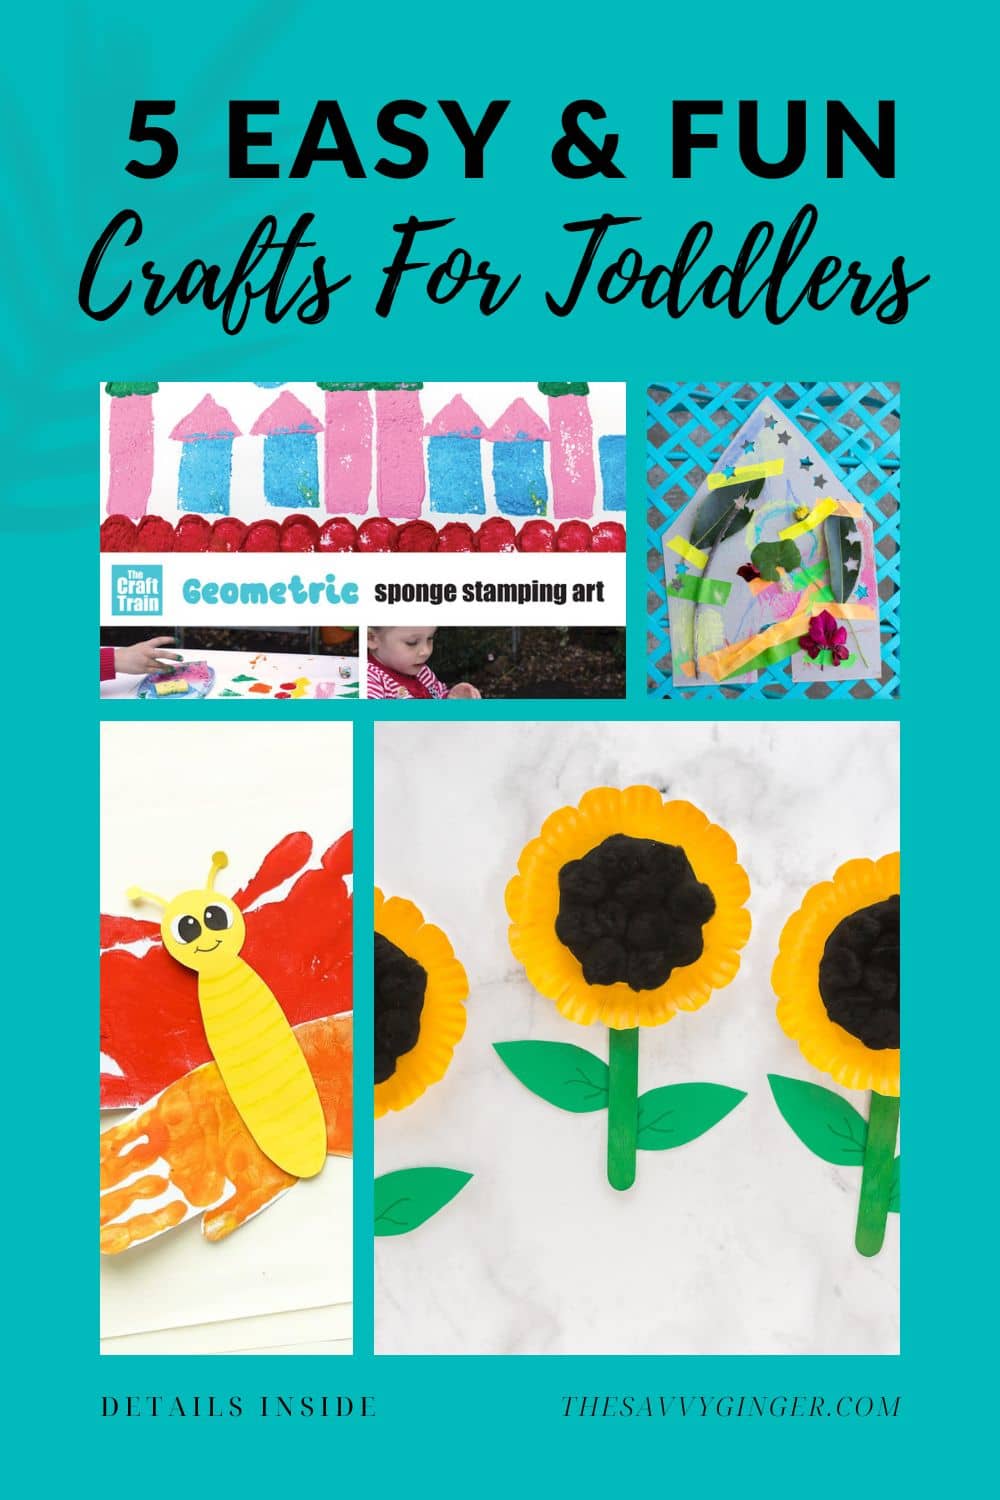 5-easy-summer-craft-ideas-for-toddlers-the-savvy-ginger